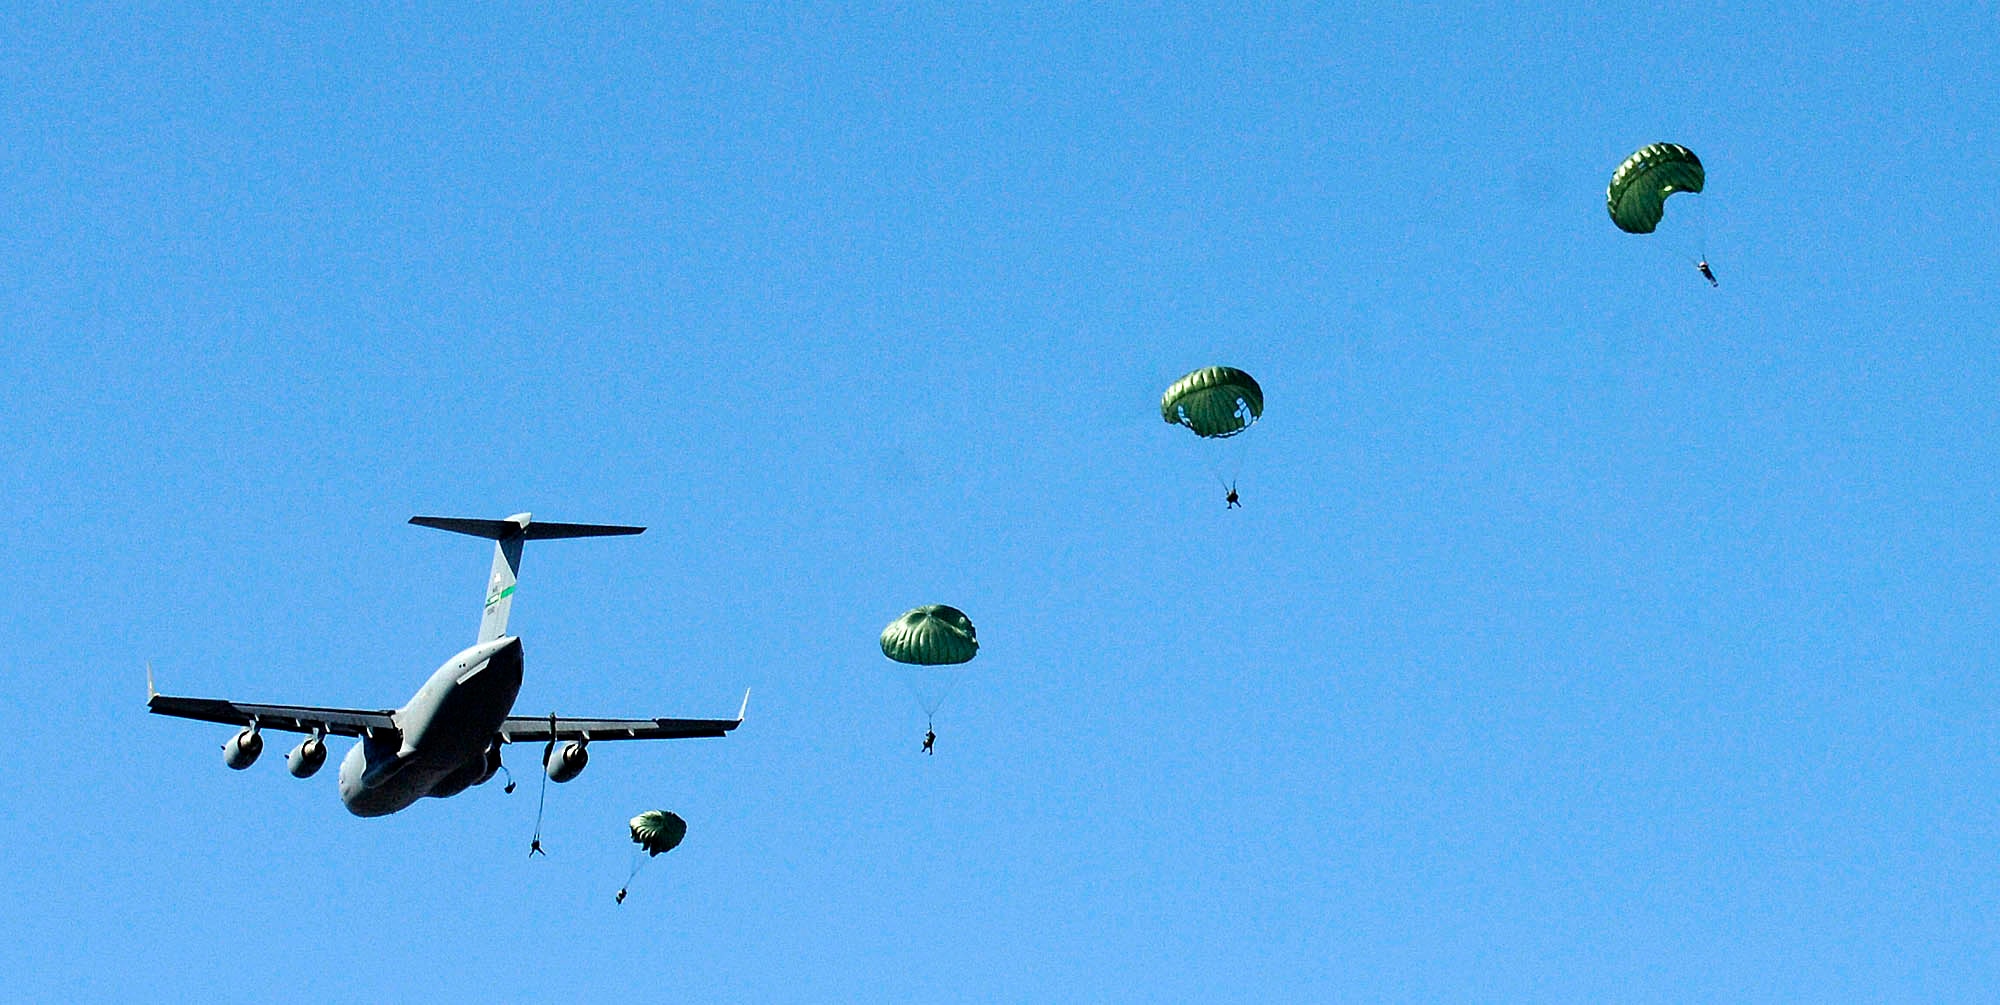 FAIRCHILD AIR FORCE BASE, Wash. – Survival, Evasion, Resistance and Escape School instructors here perform a parachute demonstration for SERE students March 24. The demonstration teaches students to correct parachute procedures during and after bailout. (U.S. Air Force photo / Staff Sgt. JT May III) 